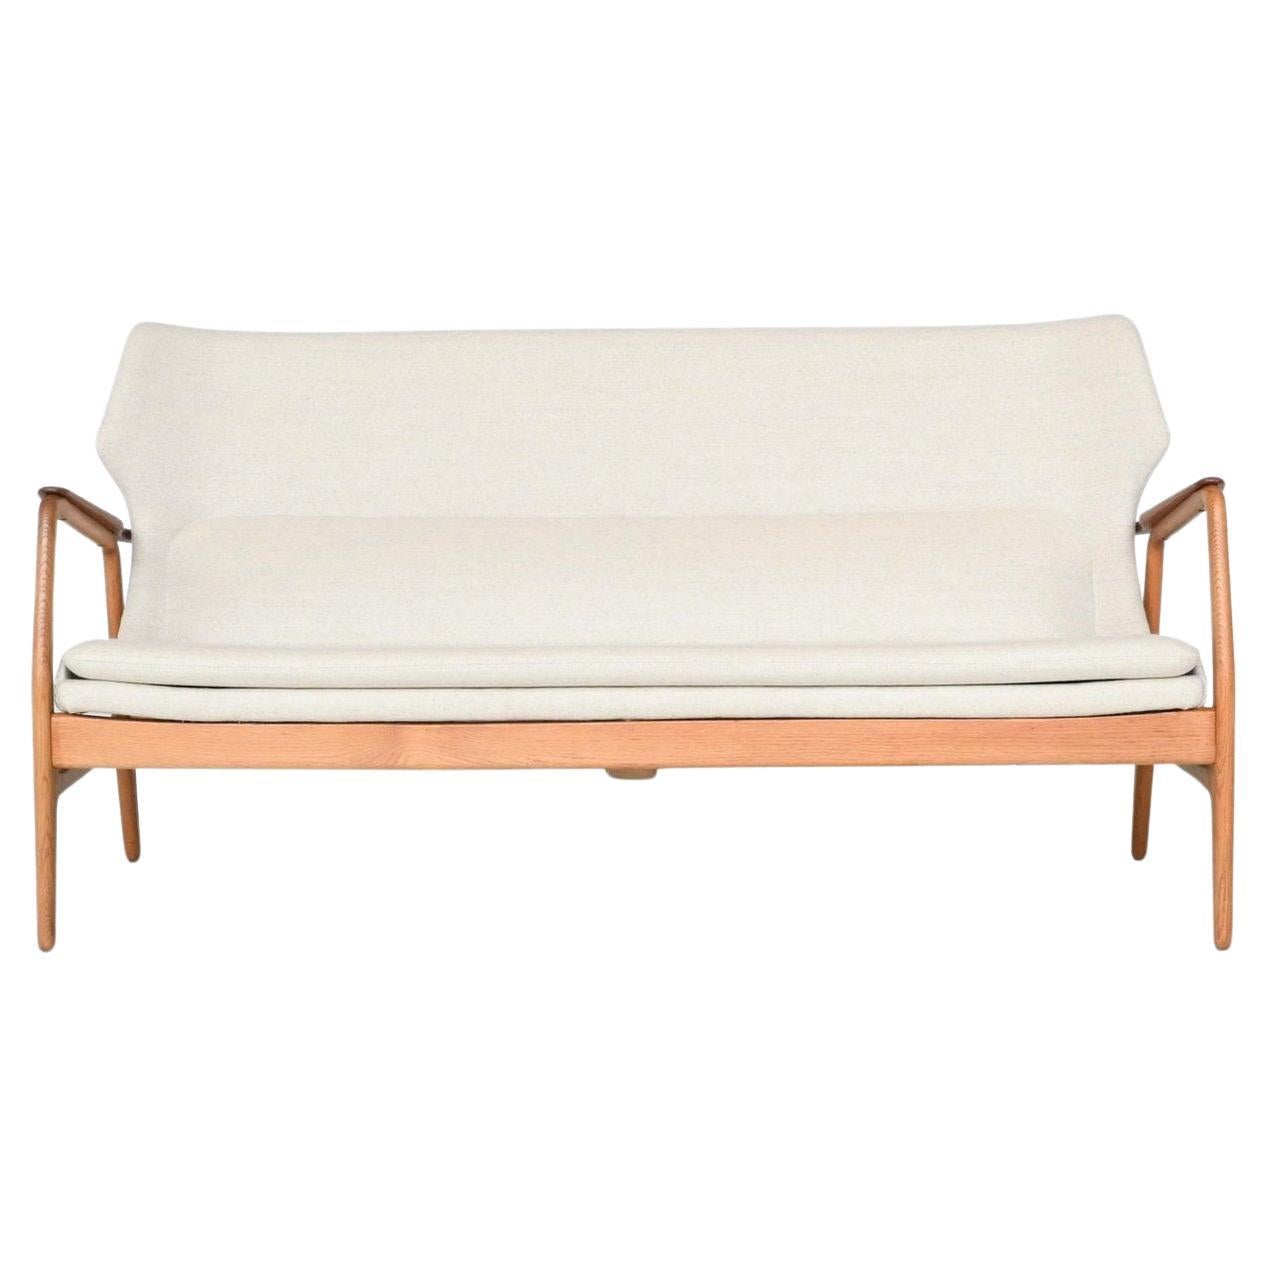 A. Madsen & H. Schubell Wingback sofa in cream Bovenkamp The Netherlands 1960